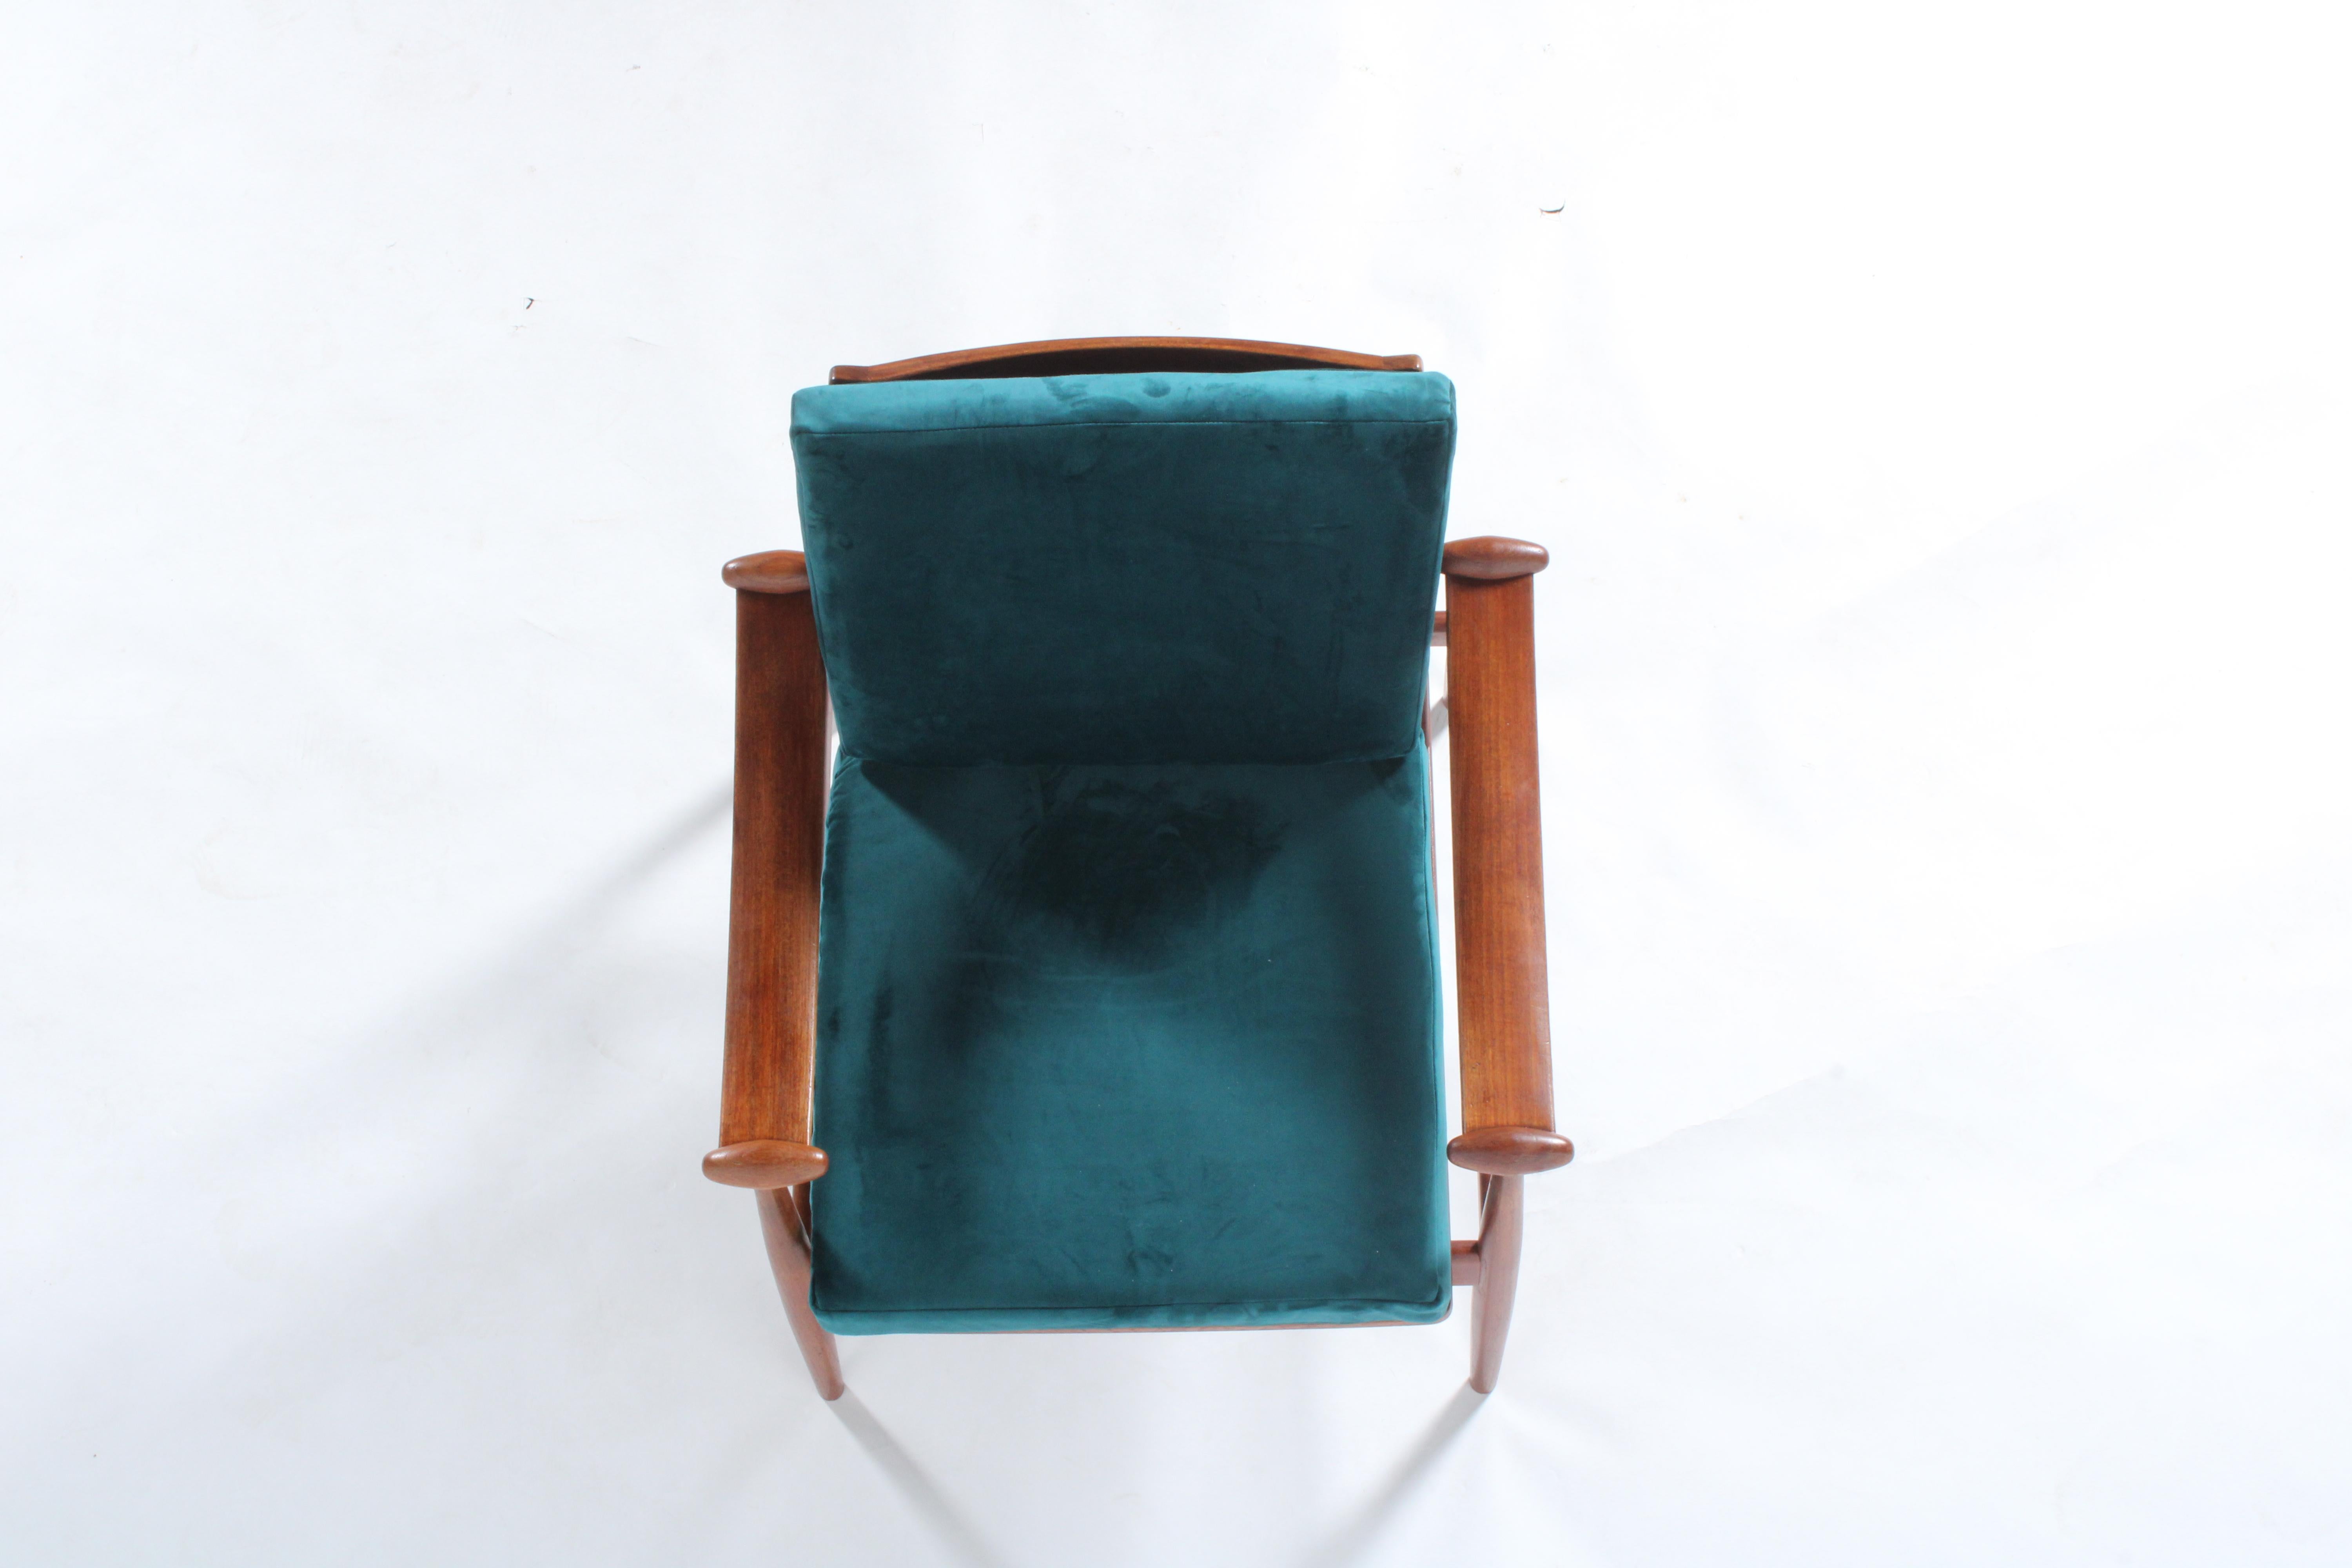 Exquisite Mid Century Danish Spade Chair By Finn Juhl For France & Son In Teak For Sale 9